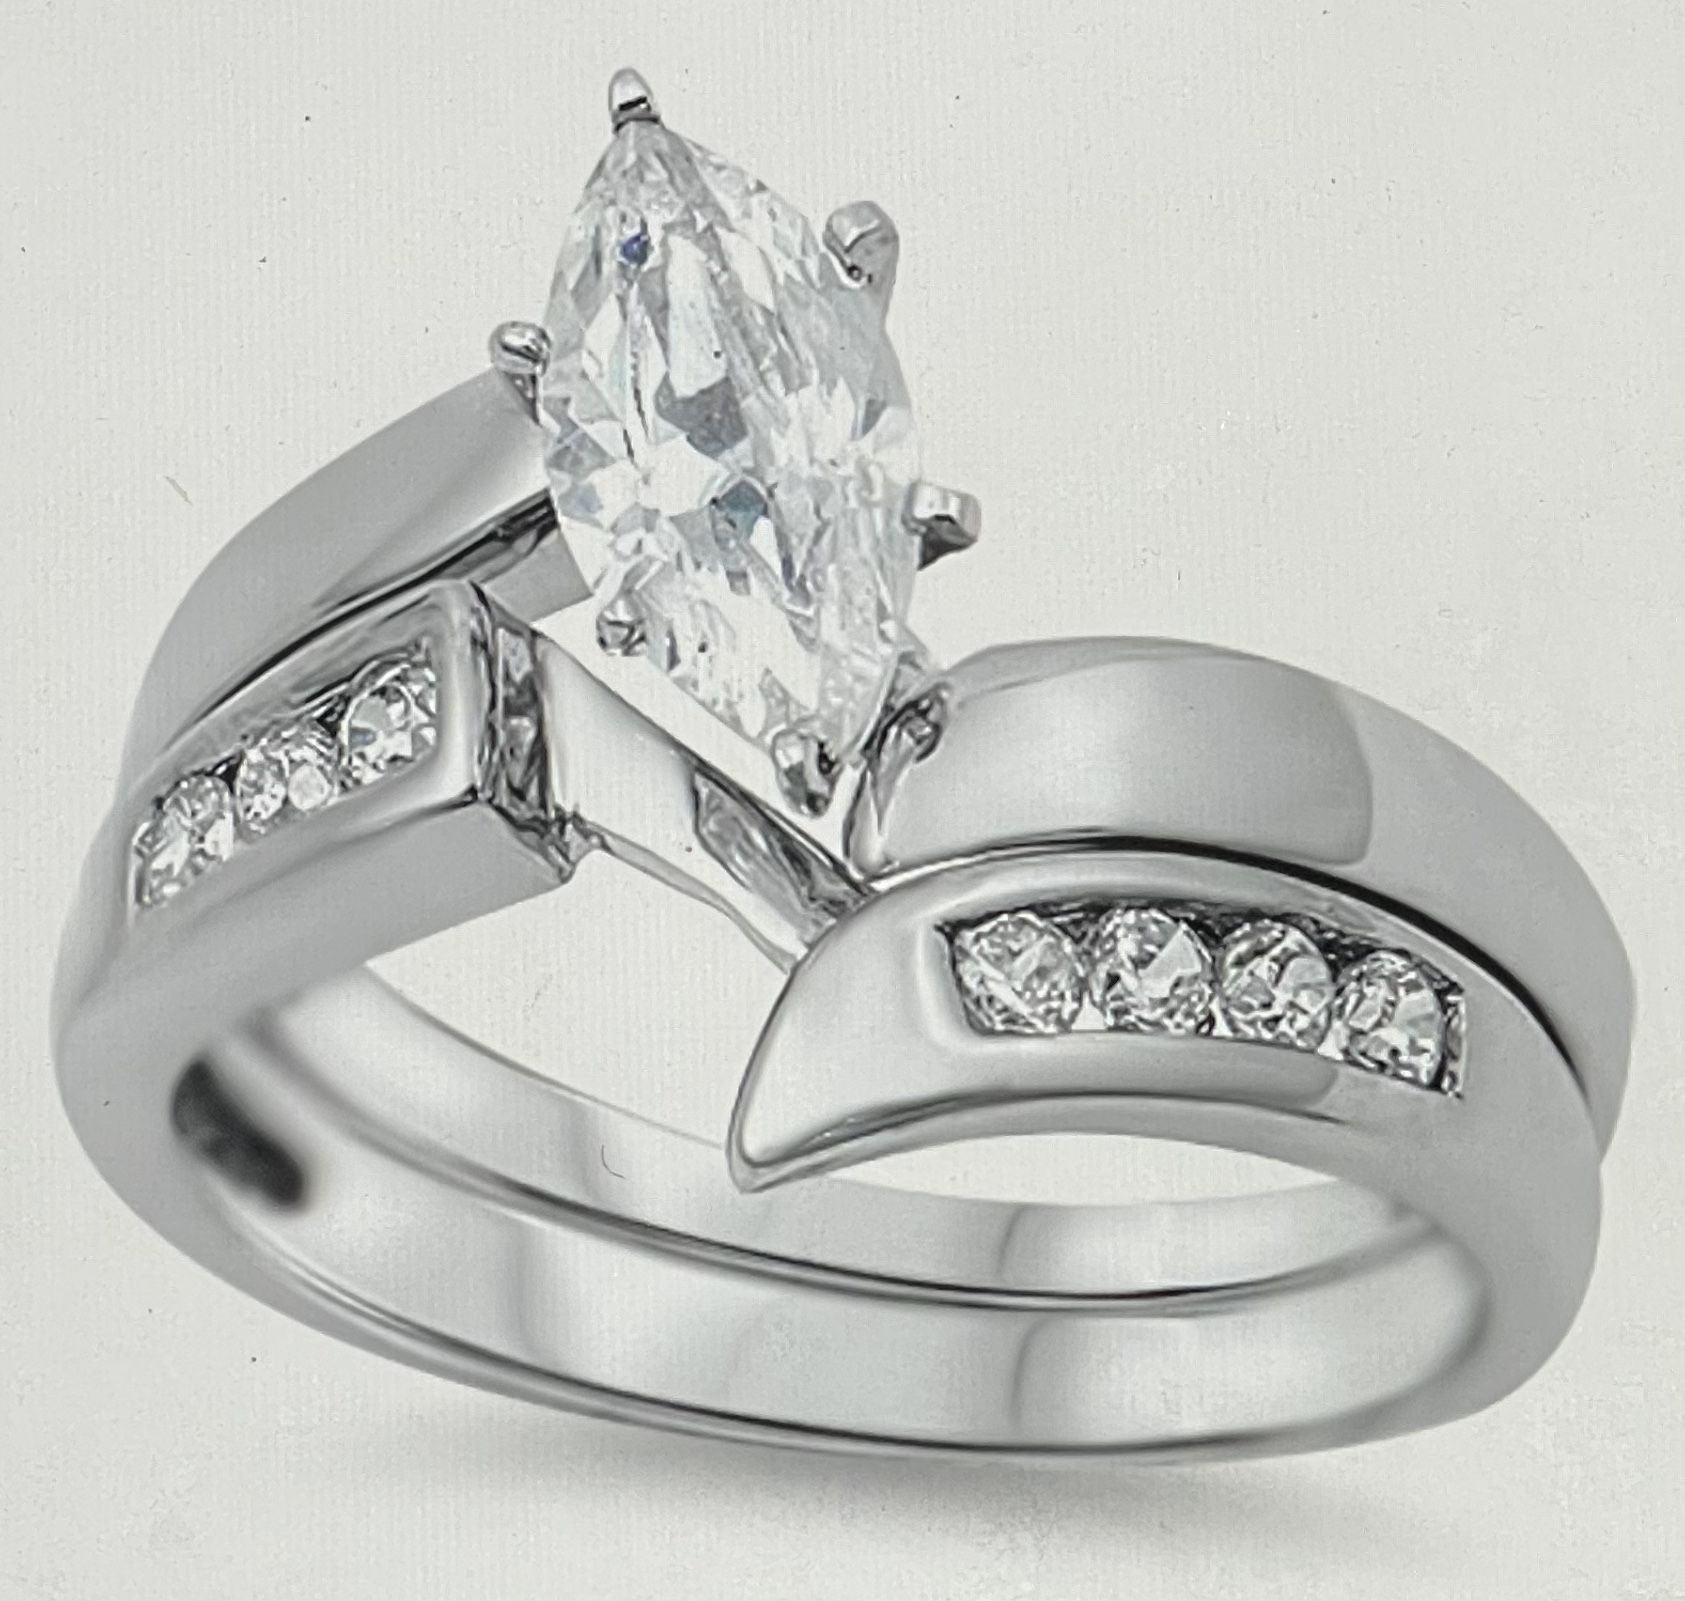 Solid 925 silver size 7 wedding engagement set ring 